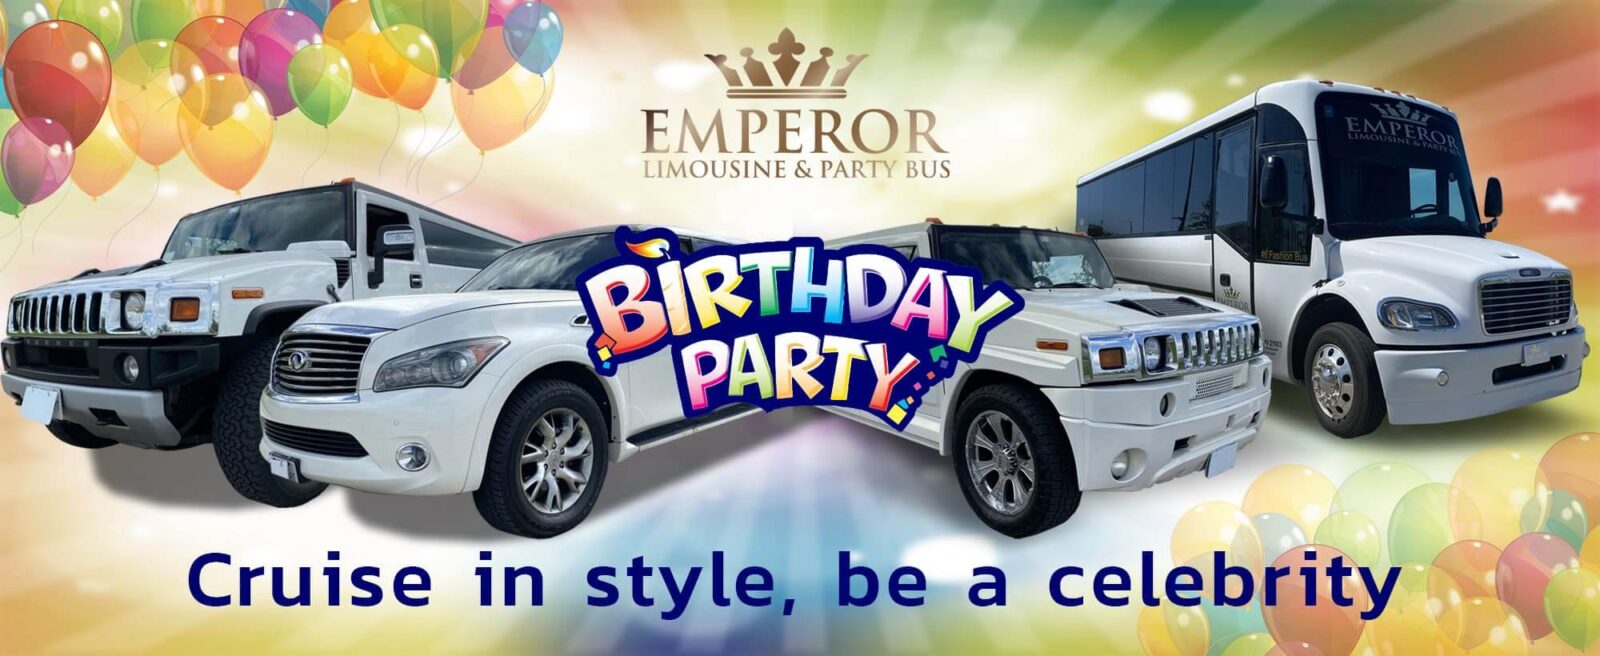 Party buses for birthdays in Chicago